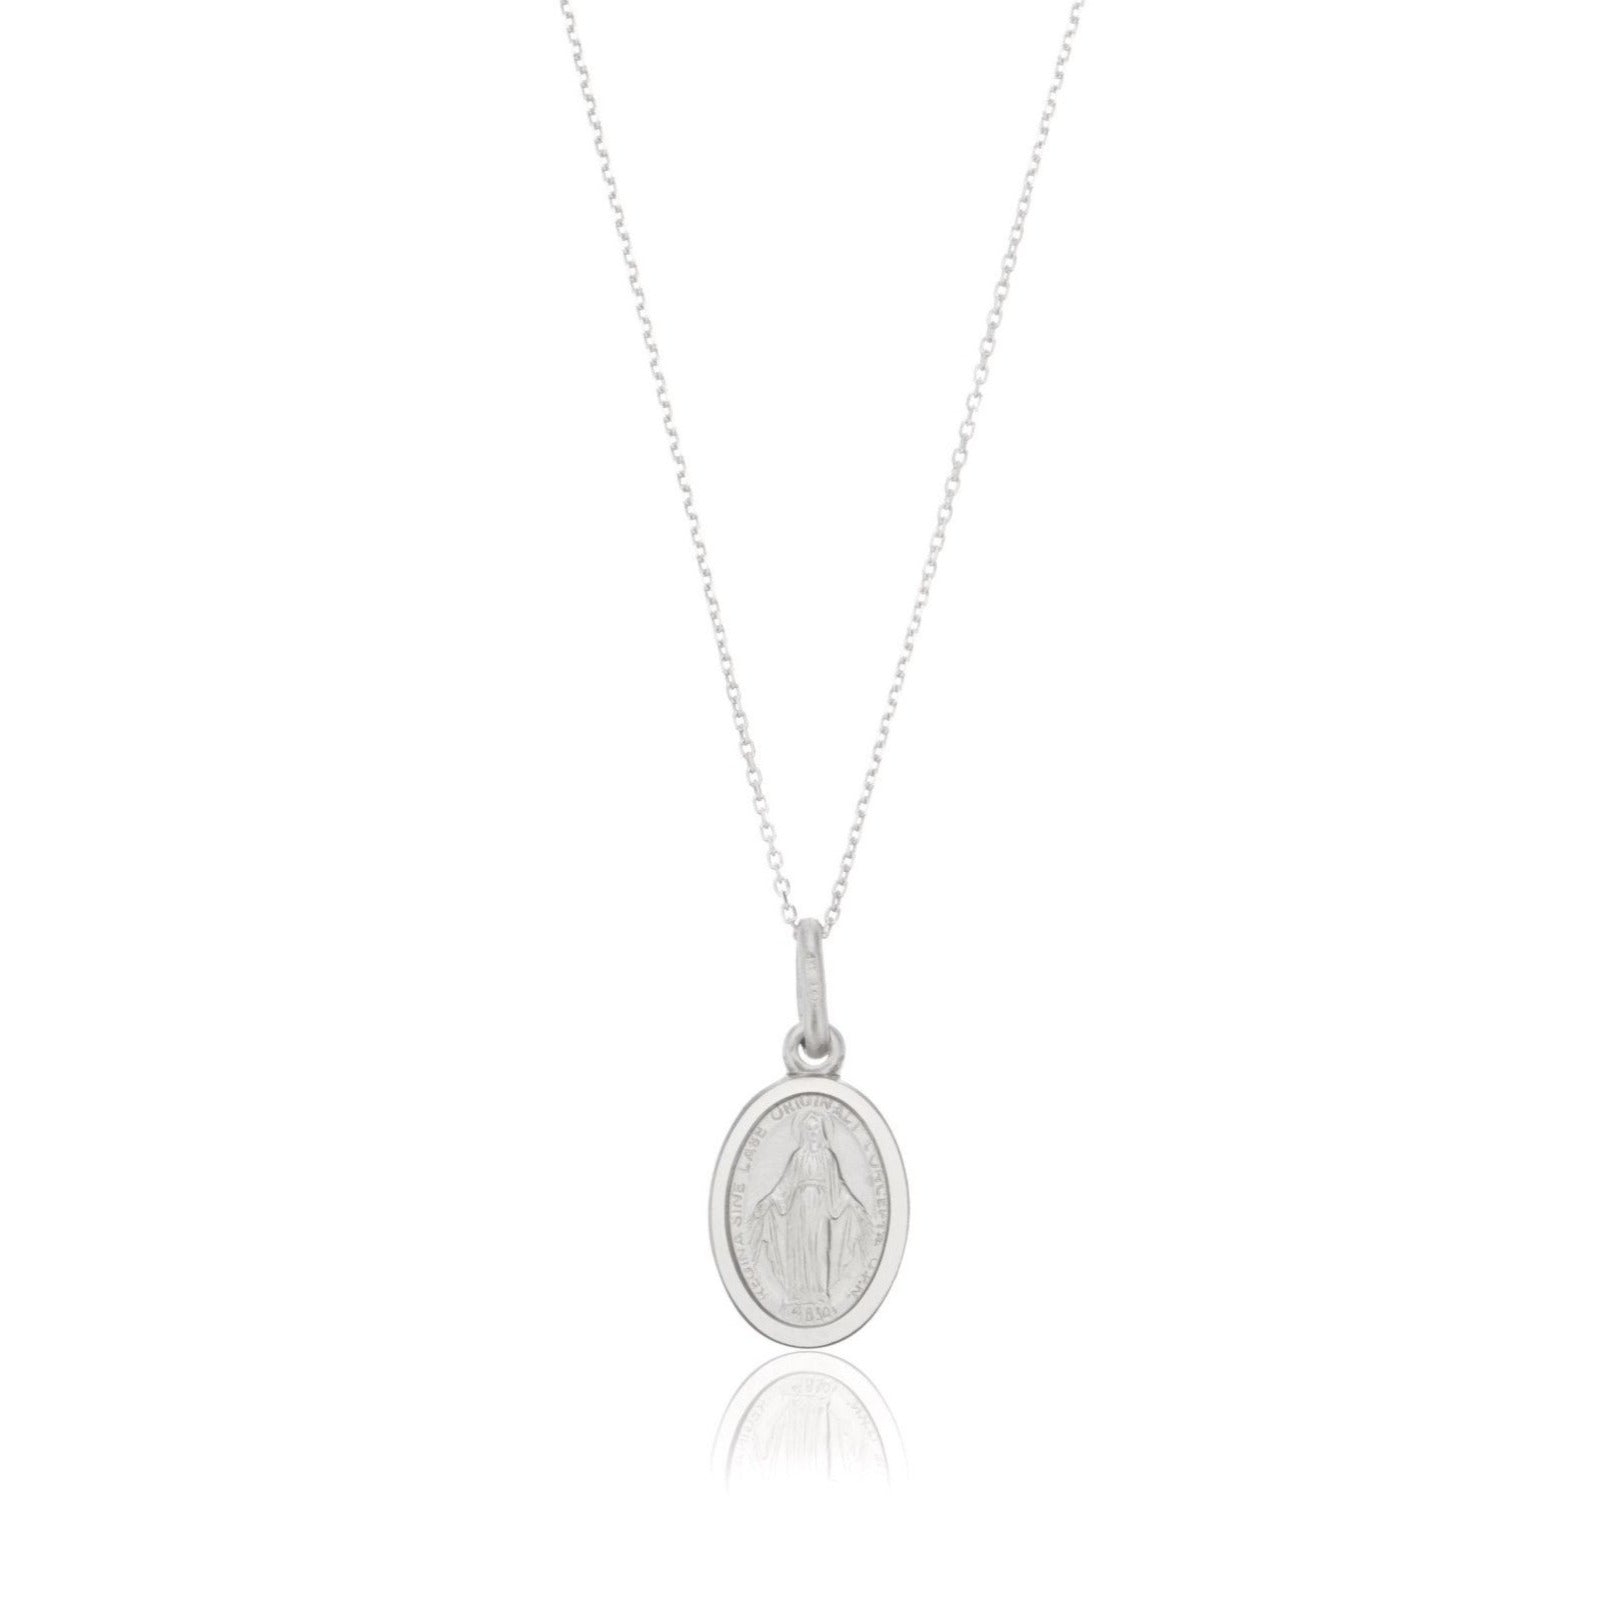 Silver small virgin mary necklace on a white background